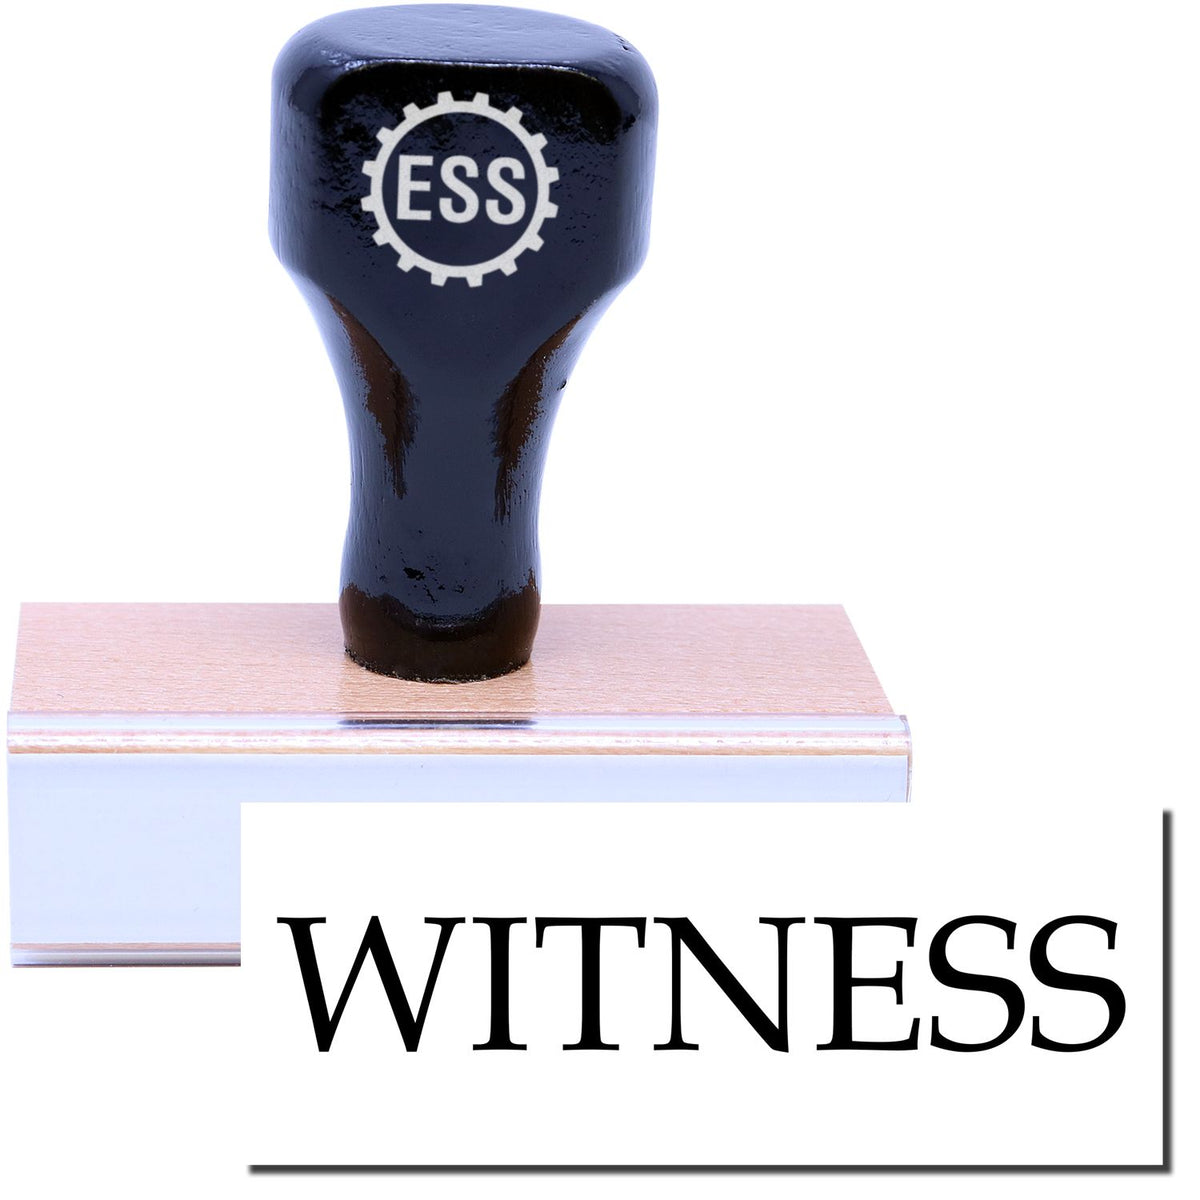 A stock office legal rubber stamp with a stamped image showing how the text &quot;WITNESS&quot; is displayed after stamping.